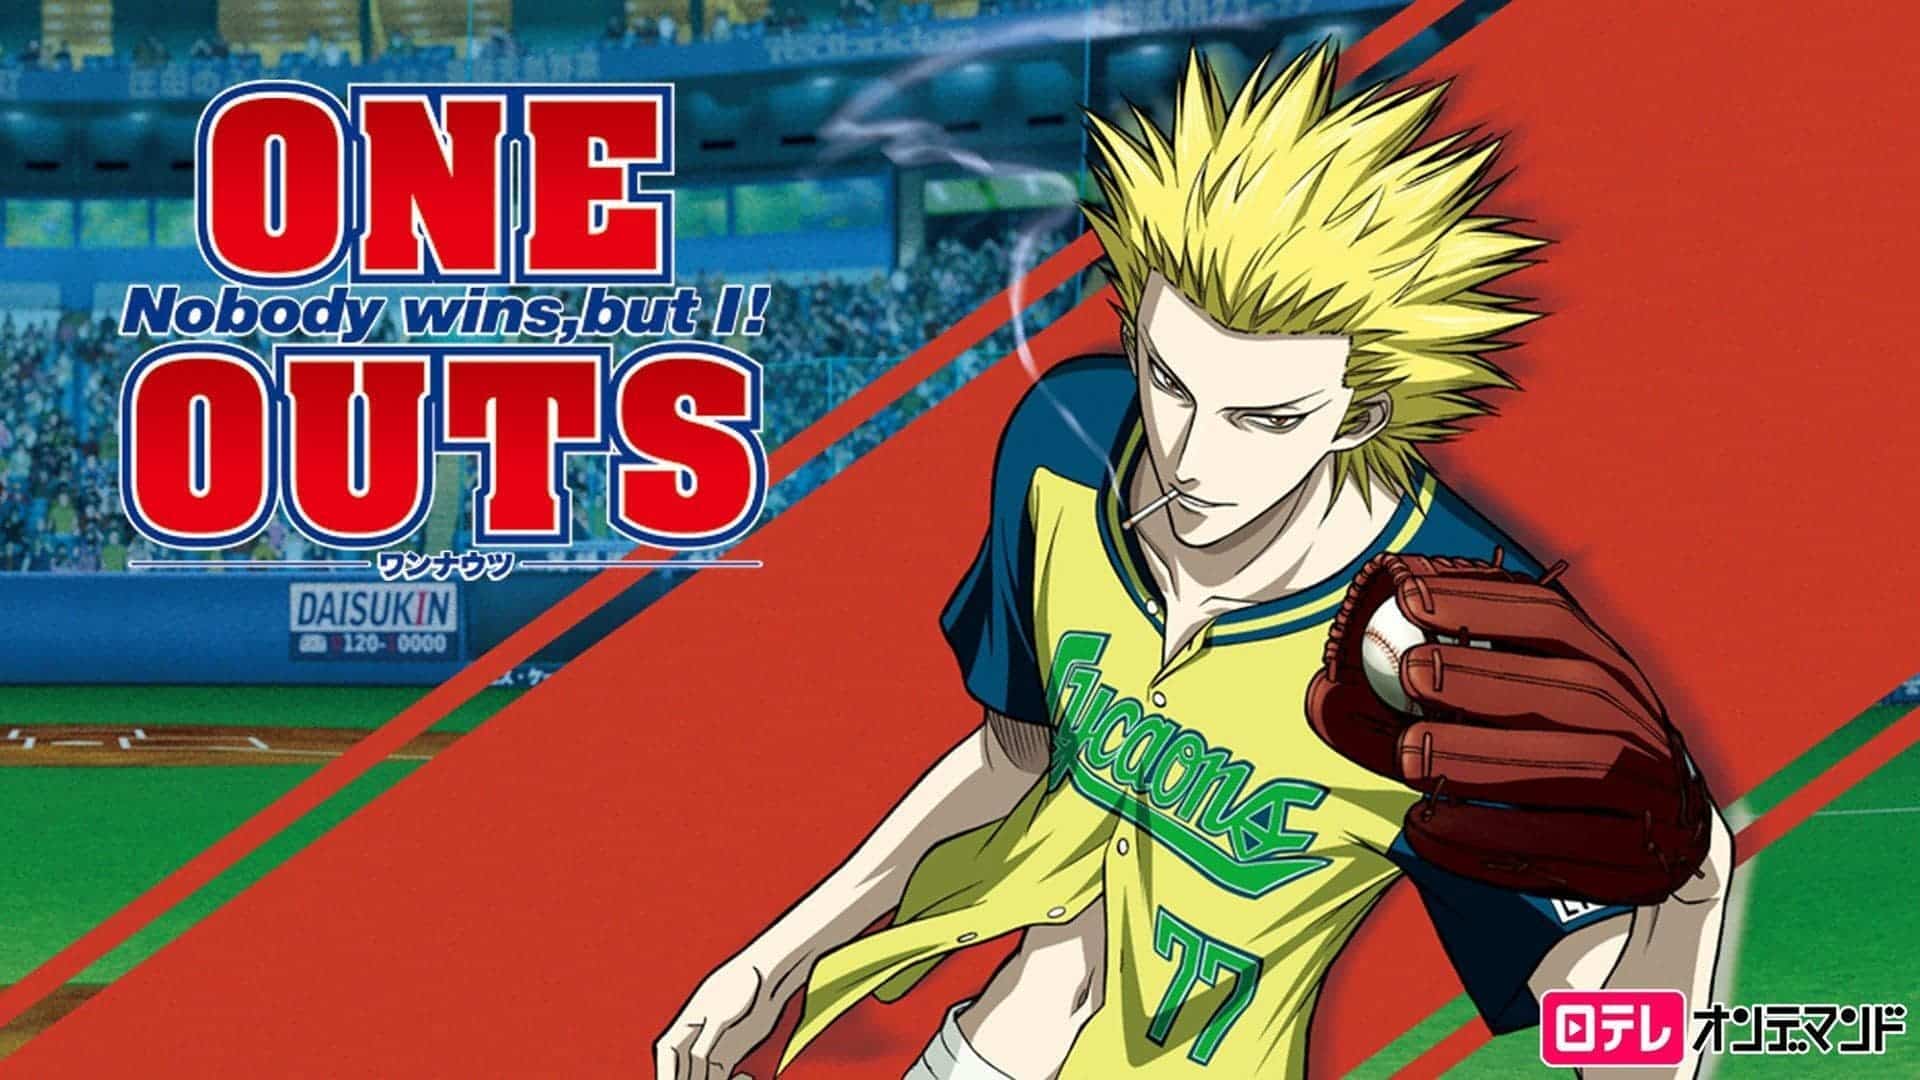 Anime Review: One Outs (2008) by Yuzo Sato